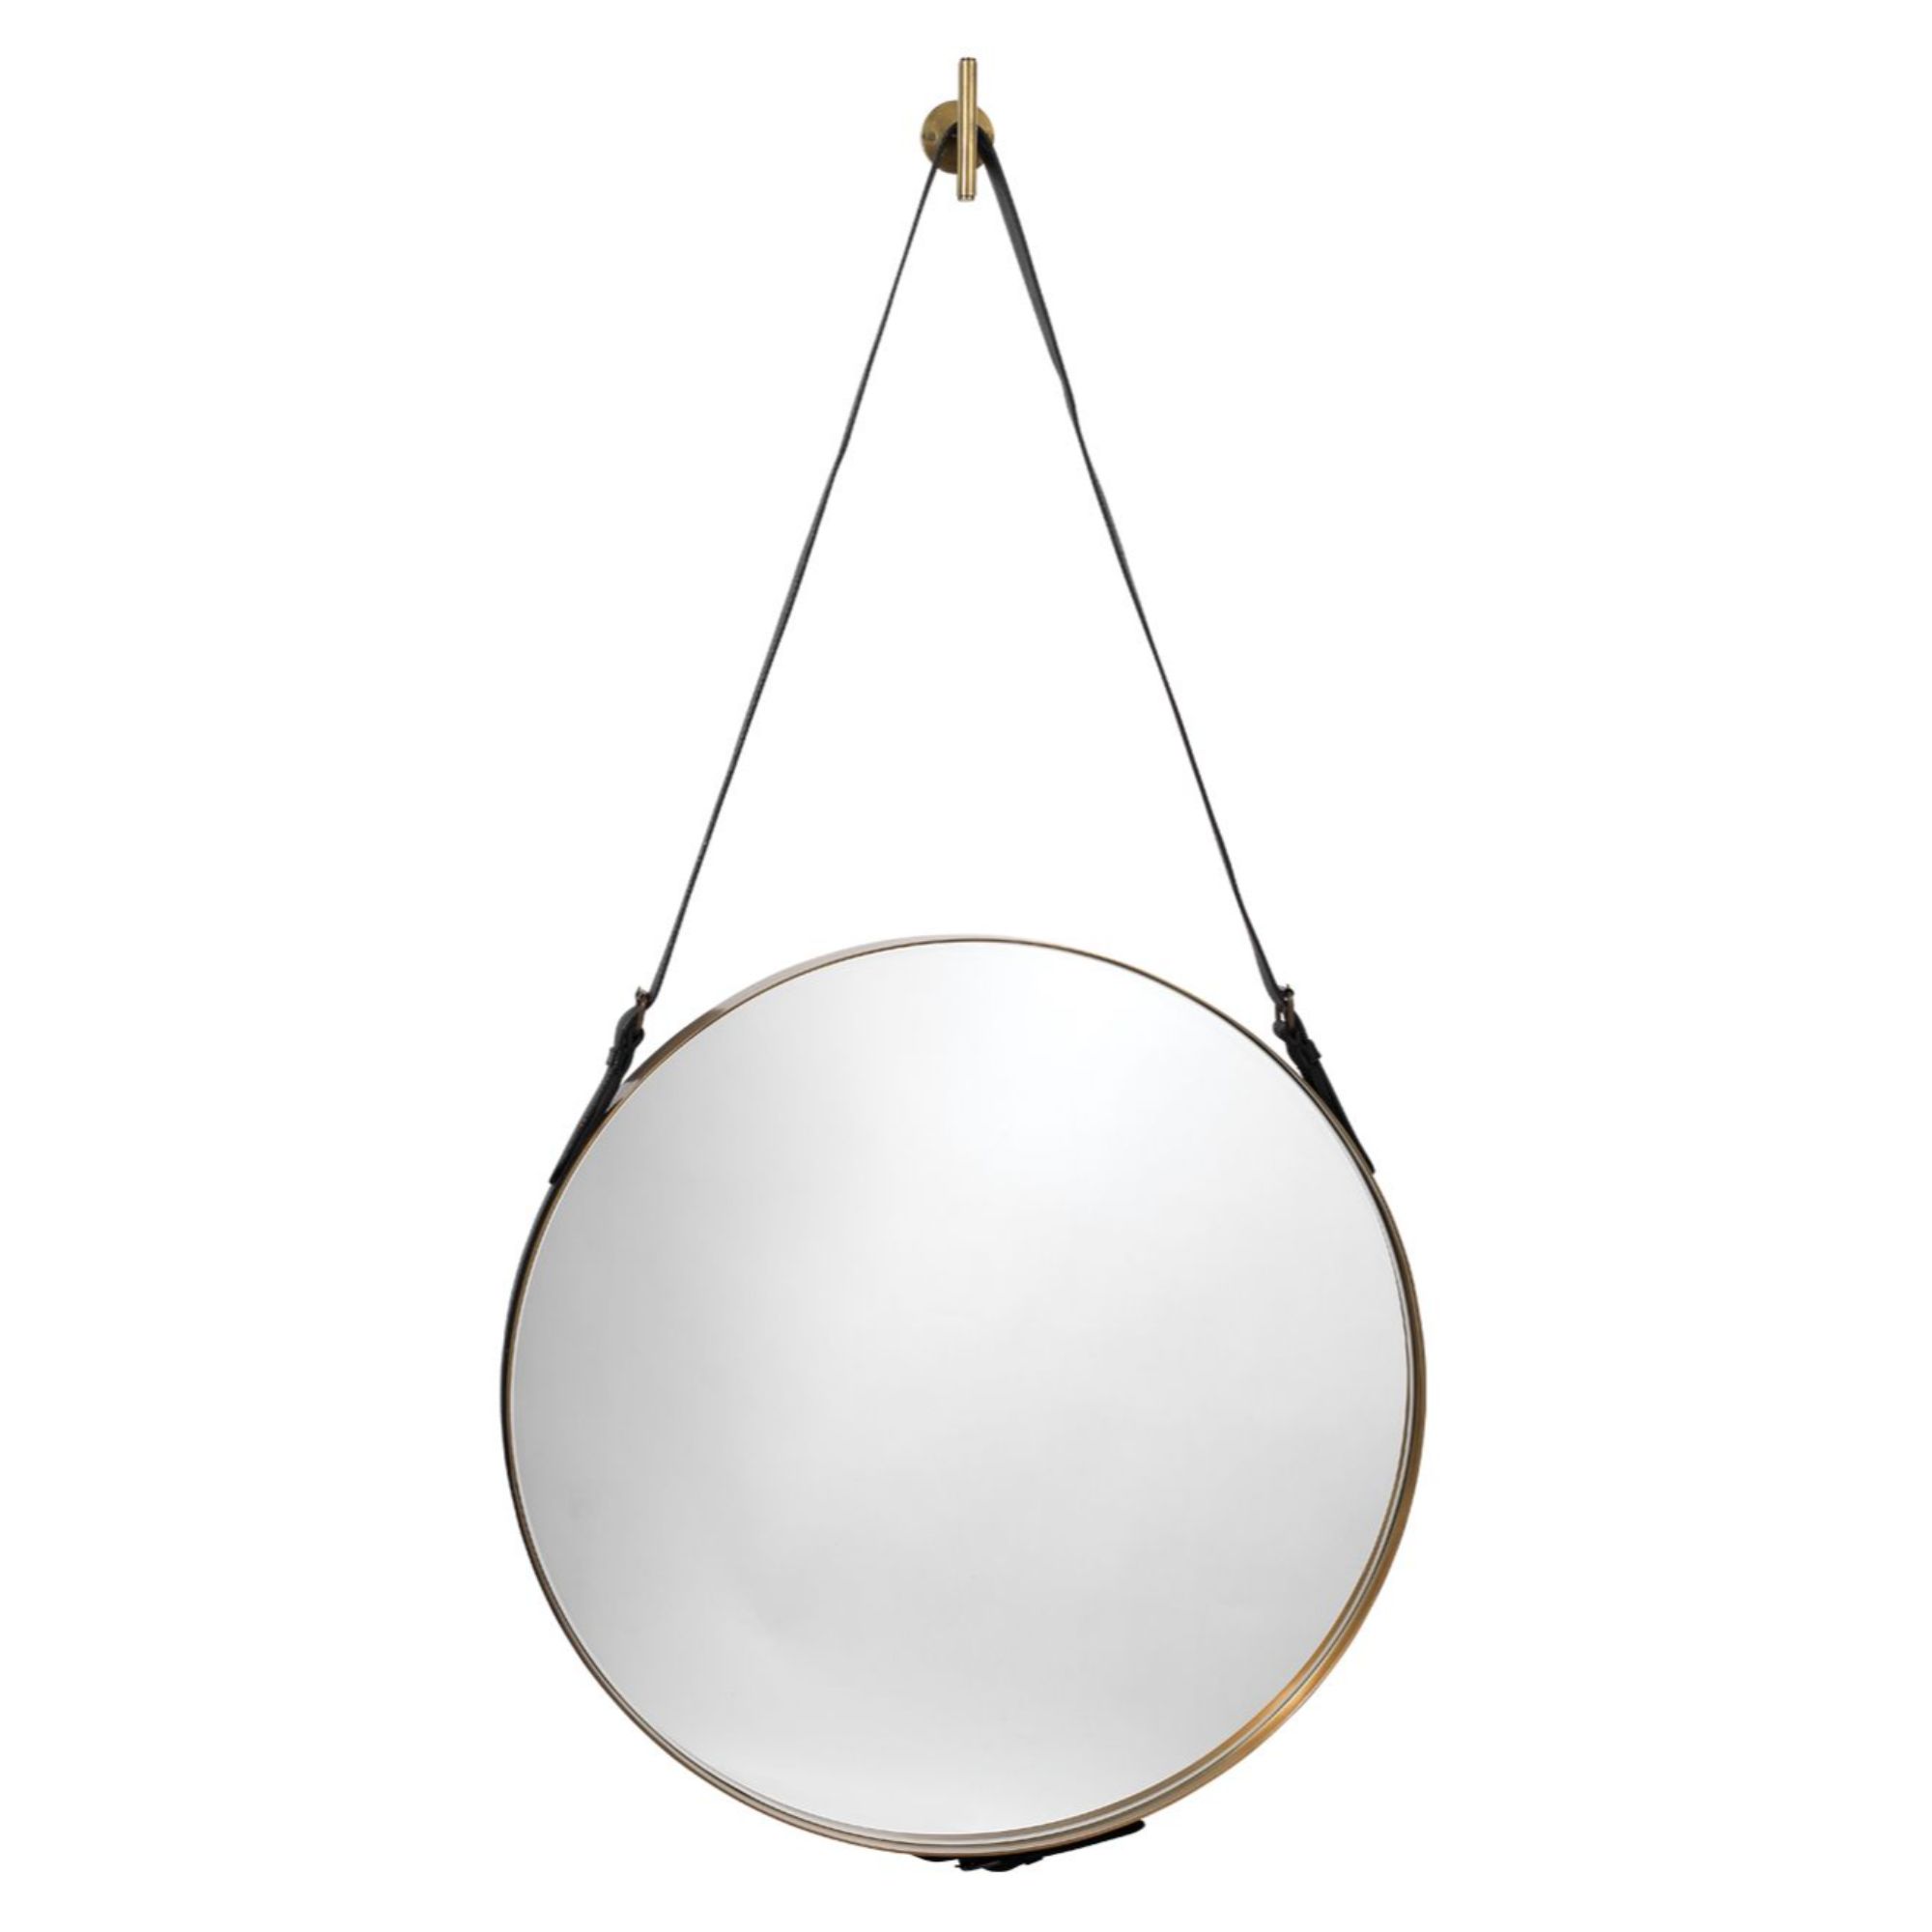 Wall Mirrors Leather Kmart, Round Mirror Leather Strap Kmart